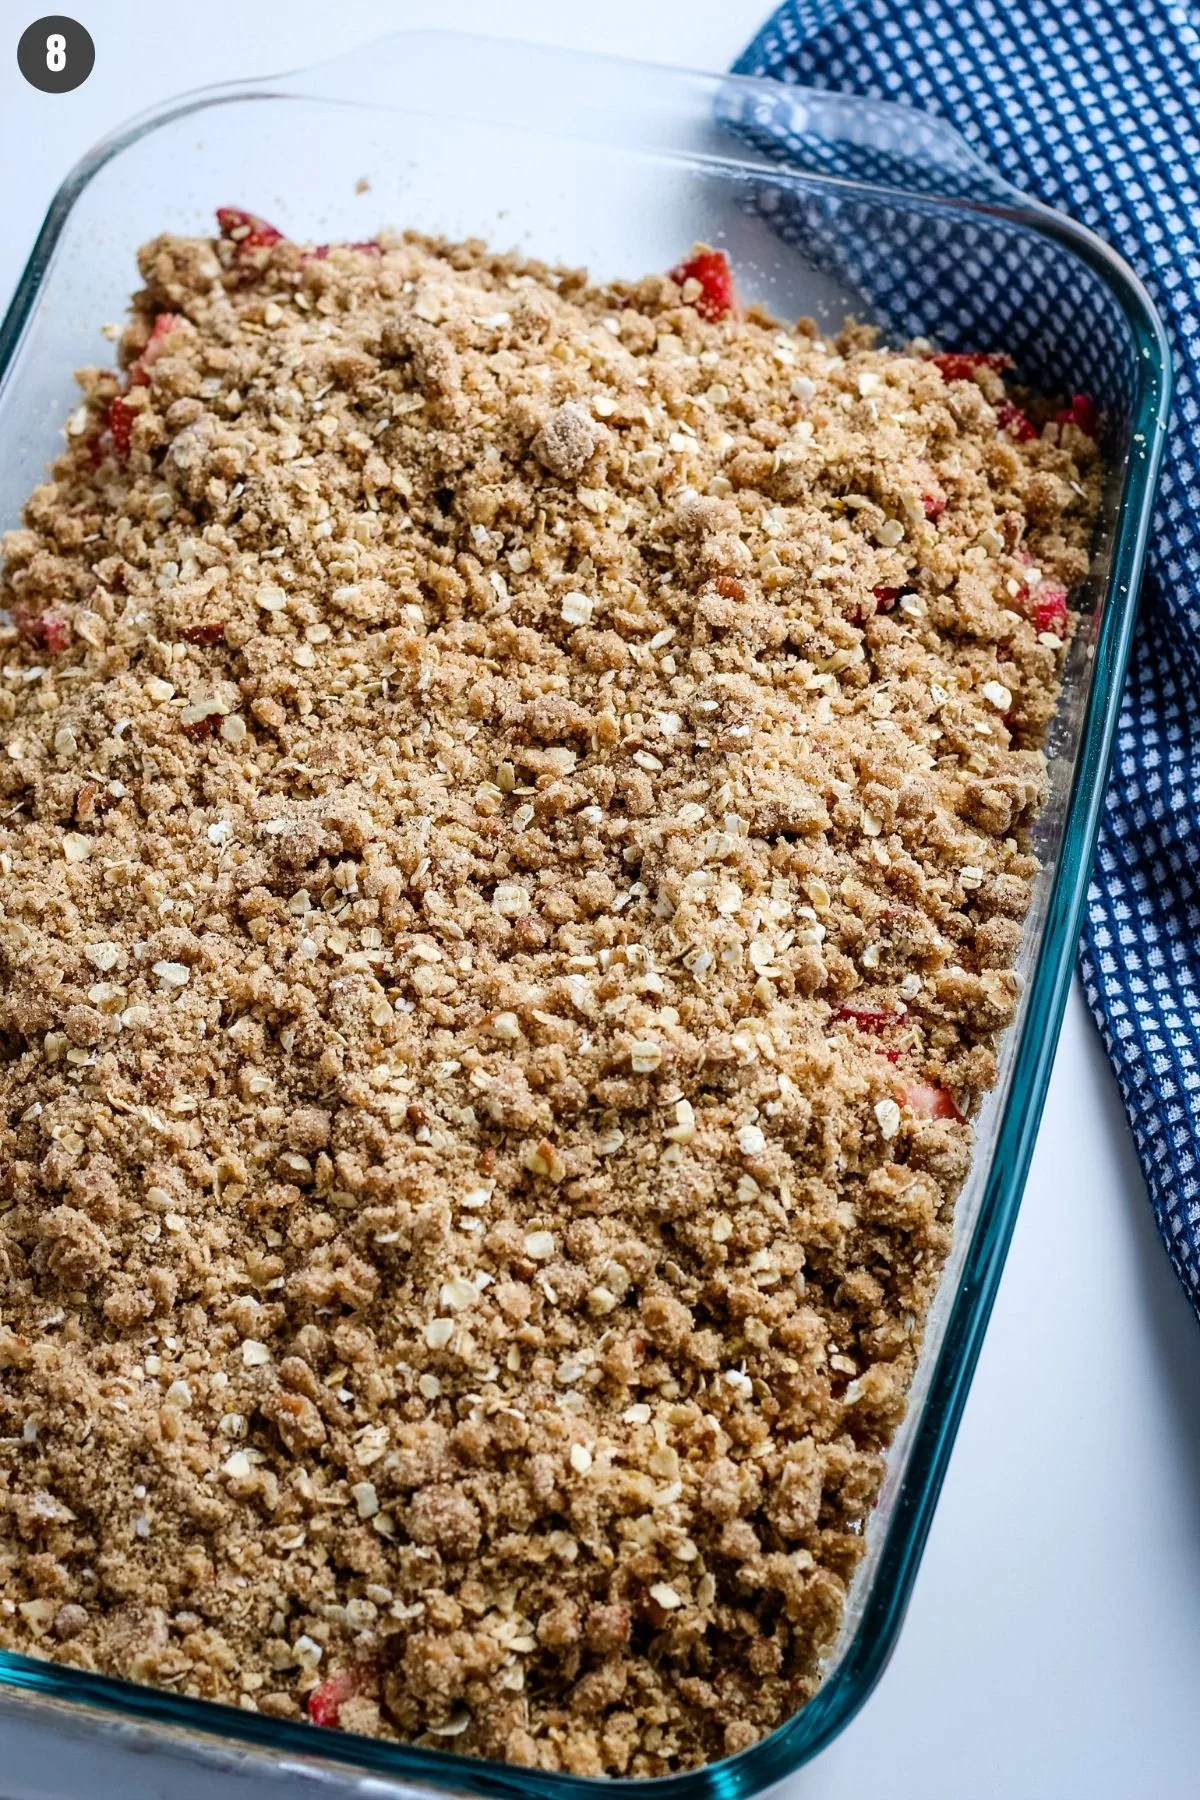 crumbled topping over gluten free rhubarb strawberry crisp in glass baking dish